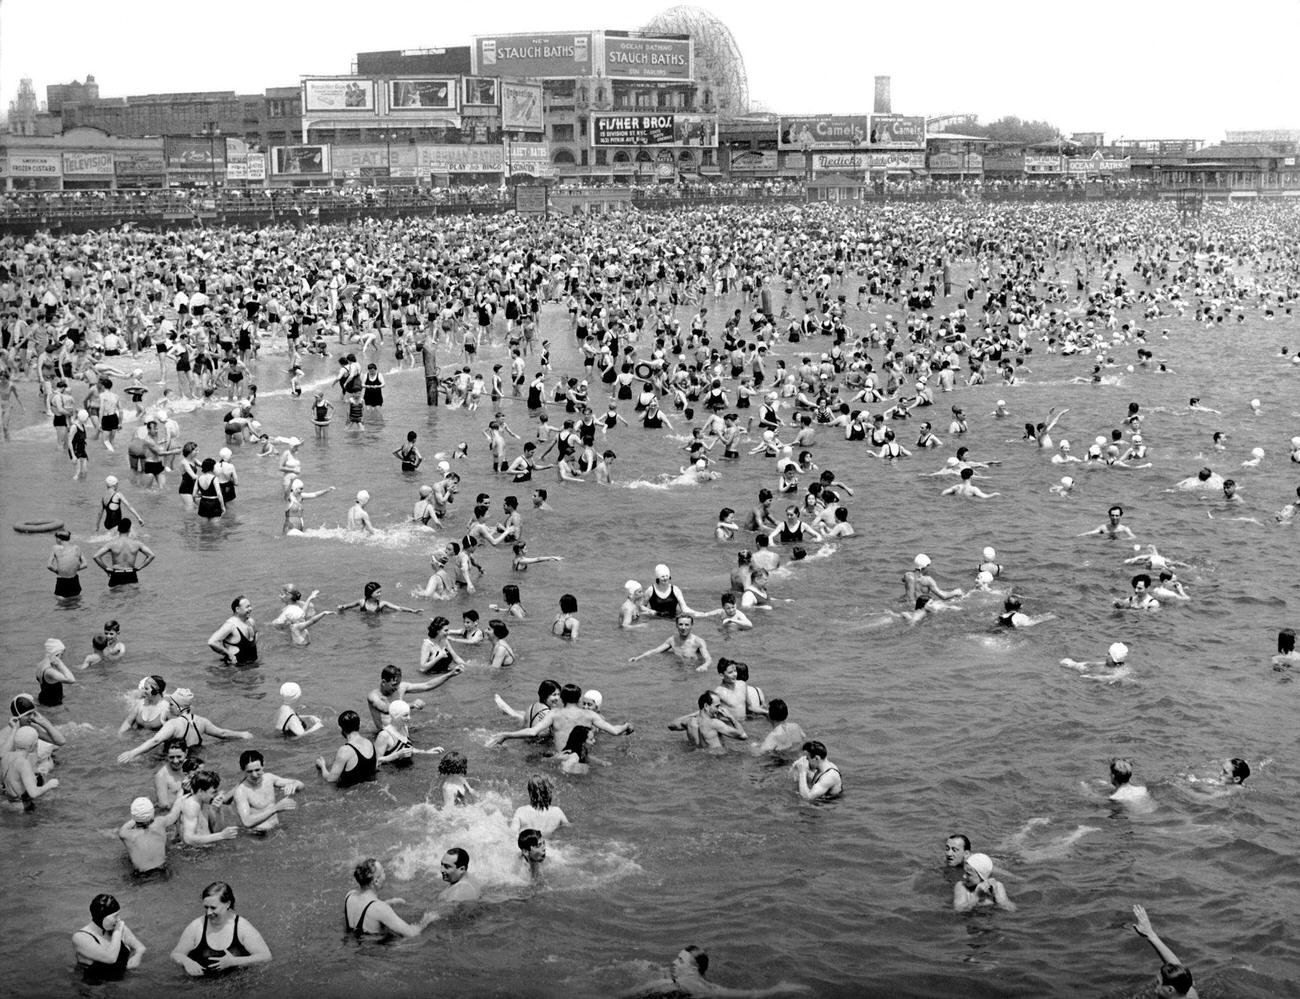 New Yorkers Flock To Coney Island To Beat Record Heat, 1937